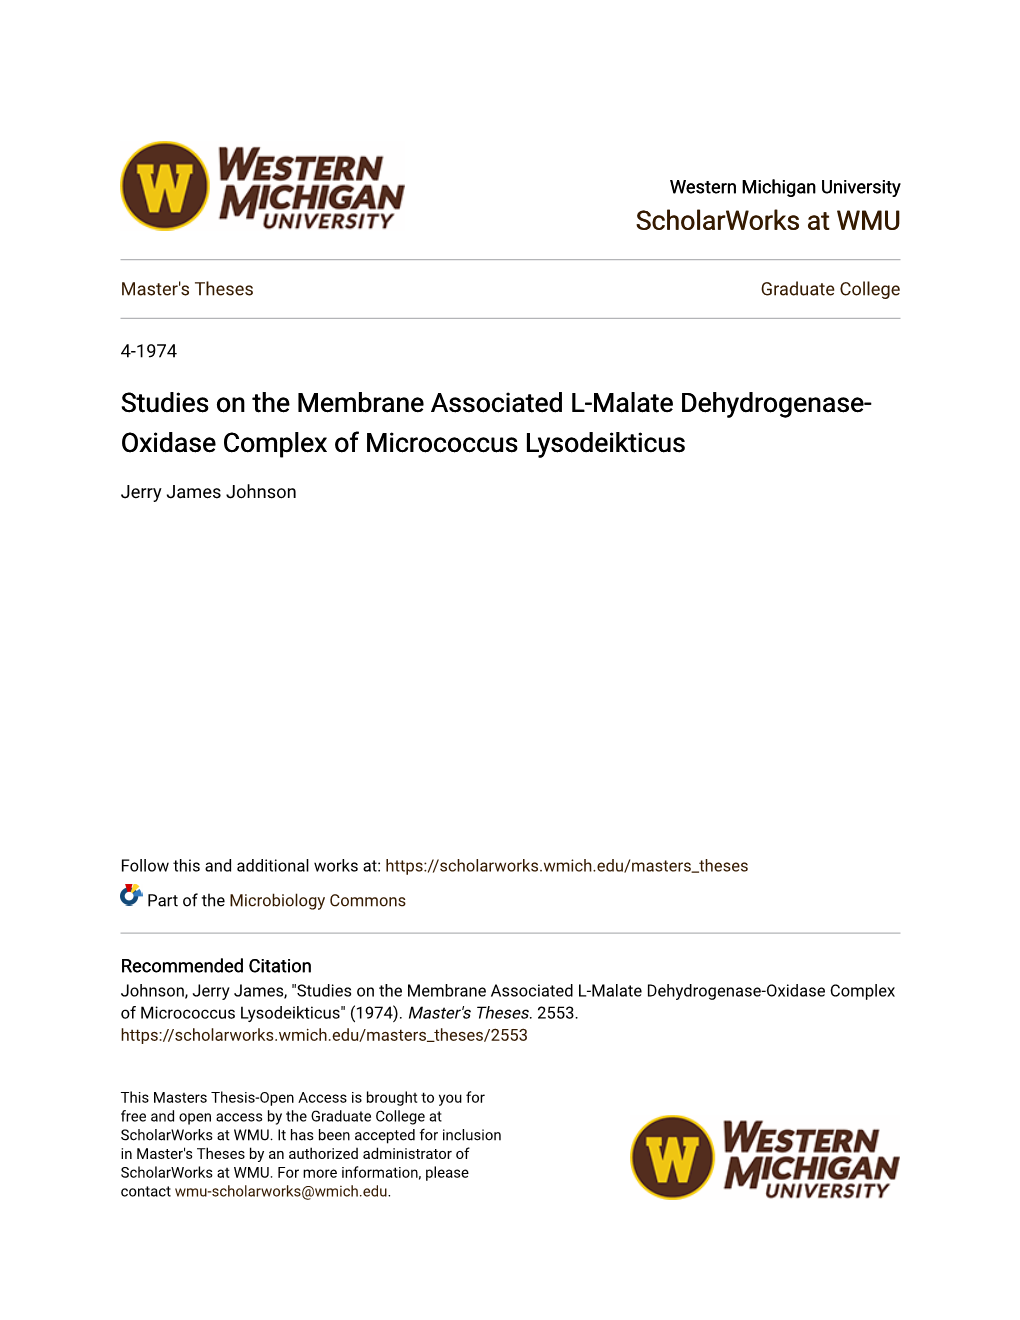 Studies on the Membrane Associated L-Malate Dehydrogenase-Oxidase Complex of Micrococcus Lysodeikticus" (1974)